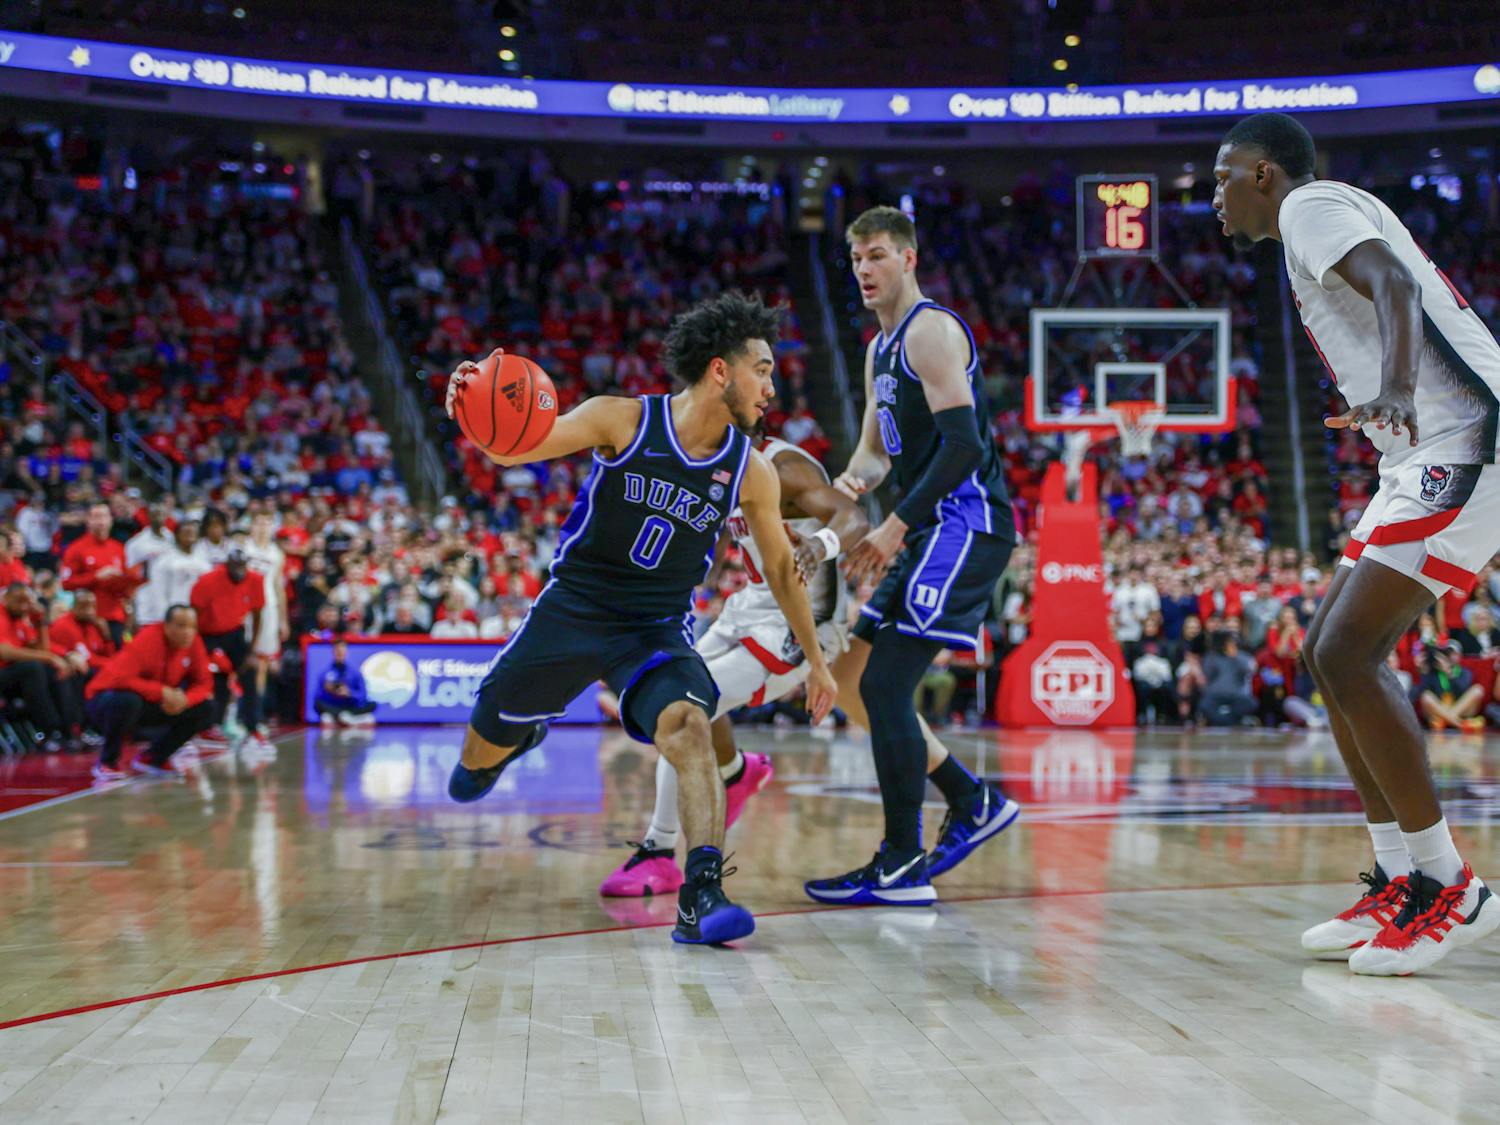 Jared McCain drives with the ball as Kyle Filipowski sets a screen during Duke's regular-season matchup with N.C. State.